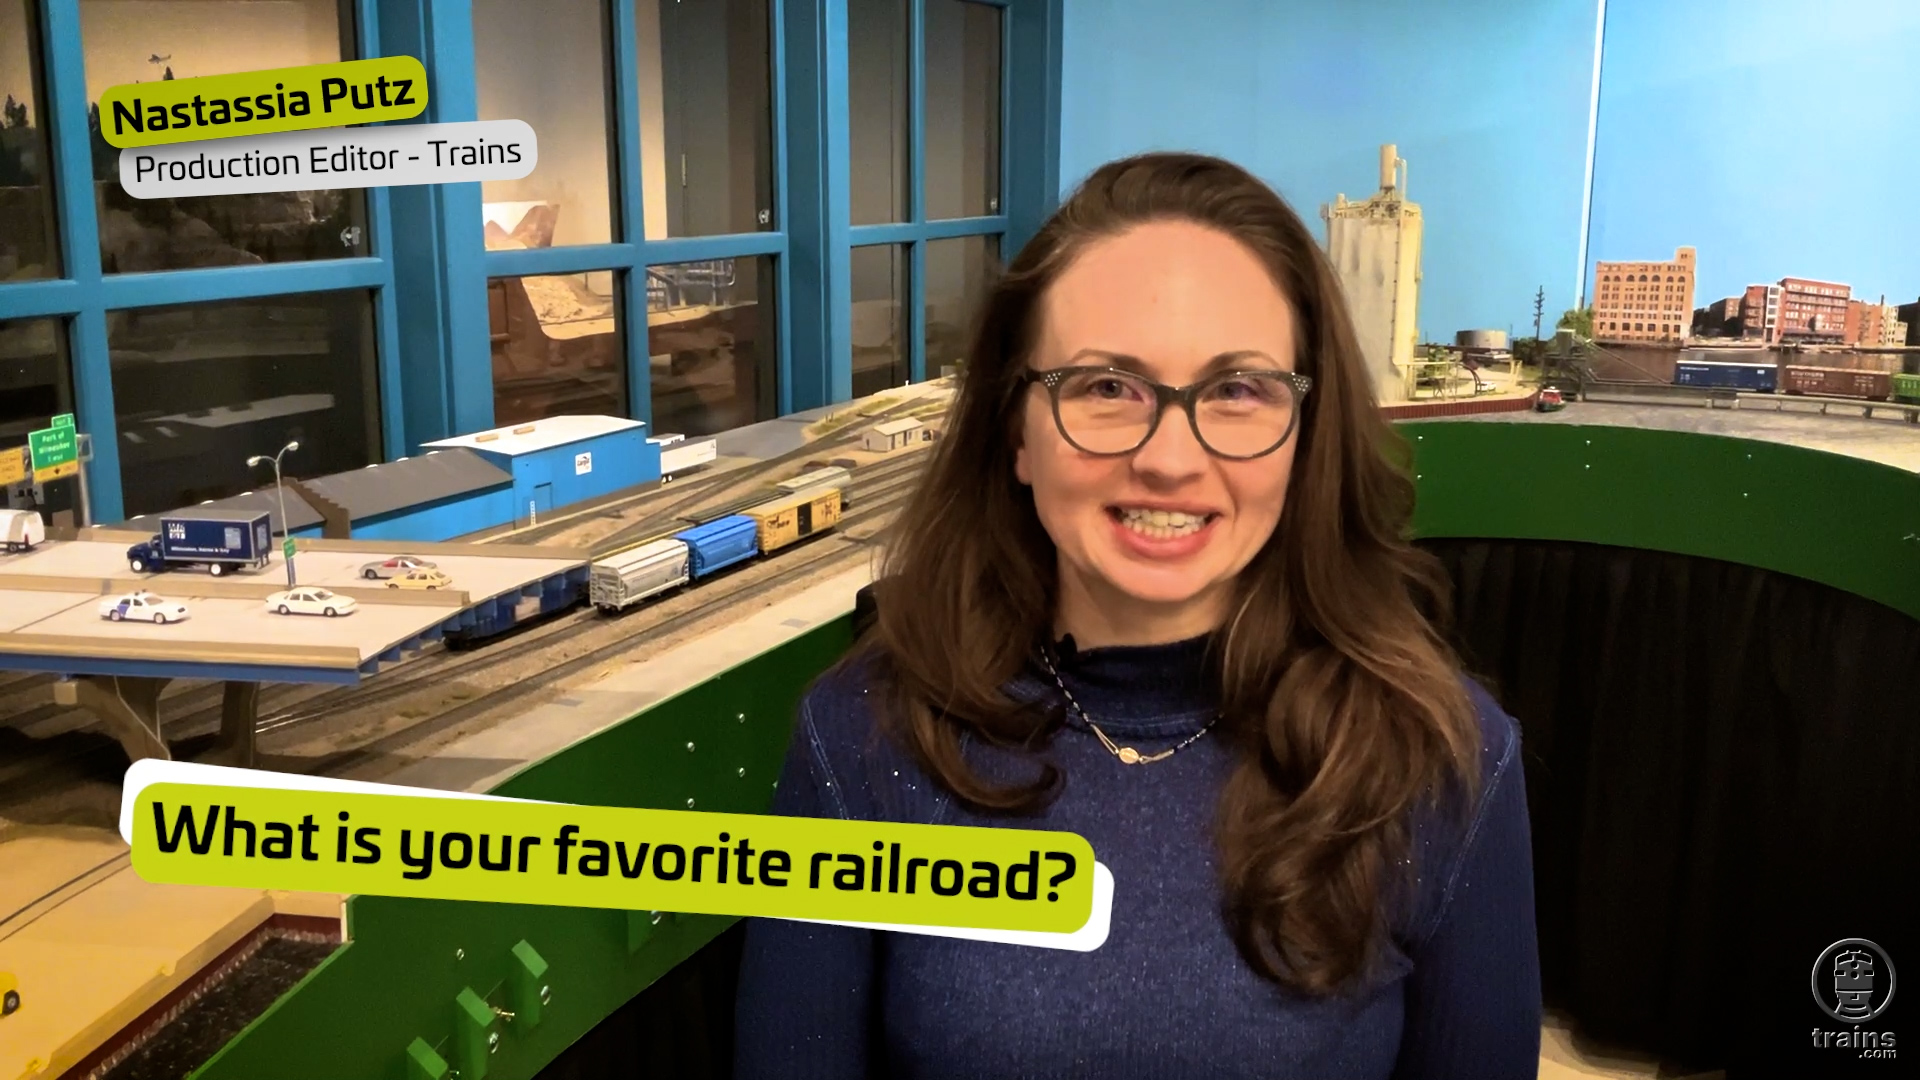 Interviewee in front of a model railroad.